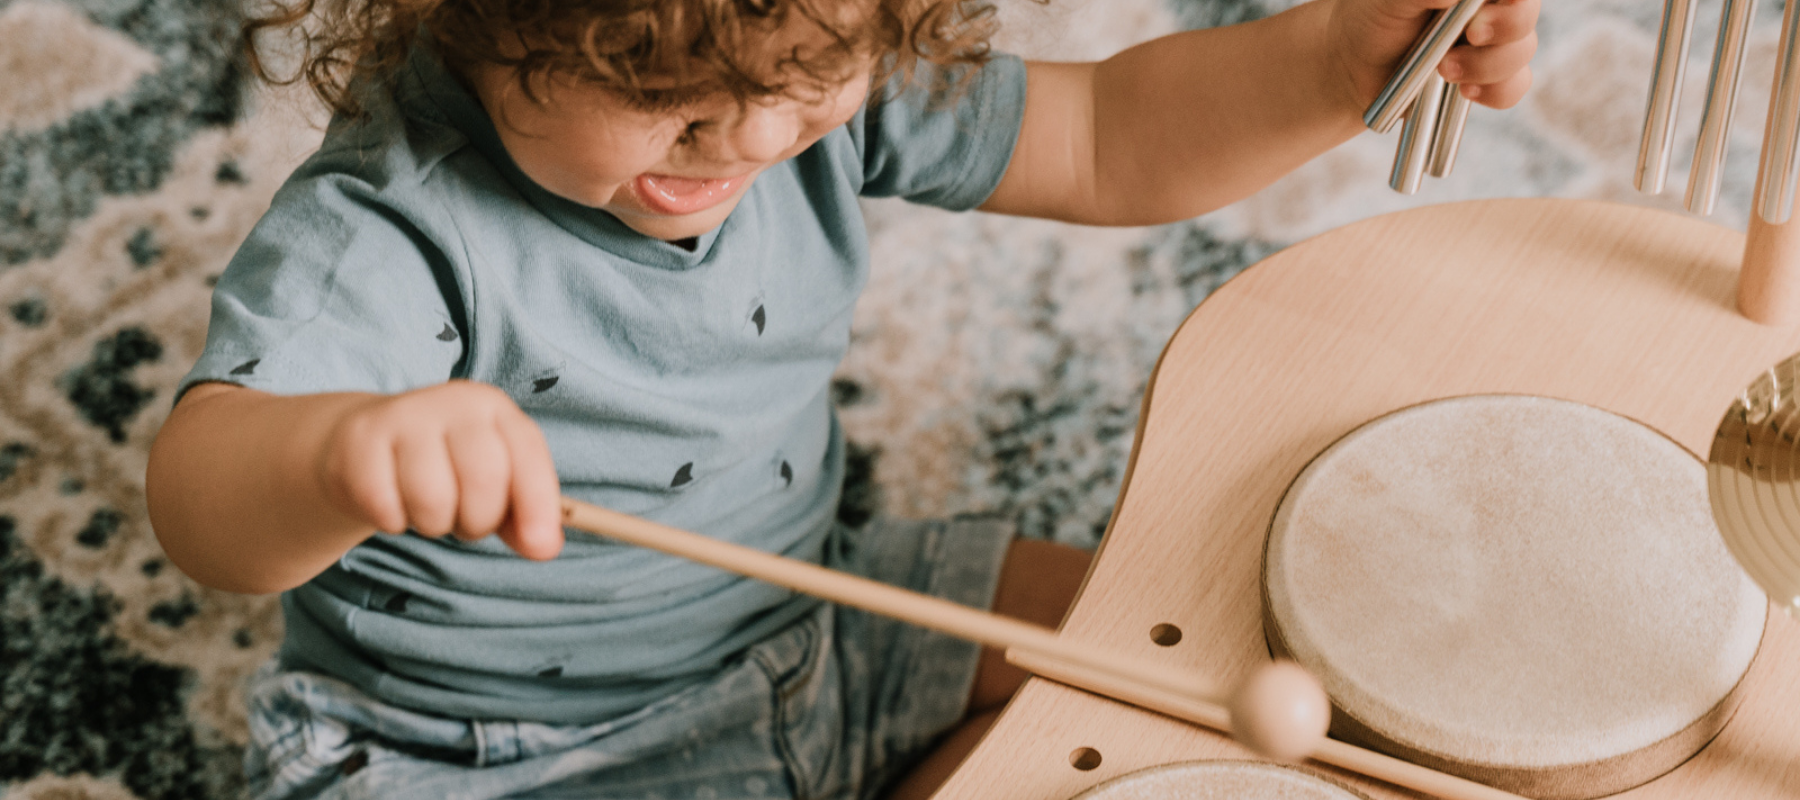 Is it Worth Paying More for a Child's Instrument?